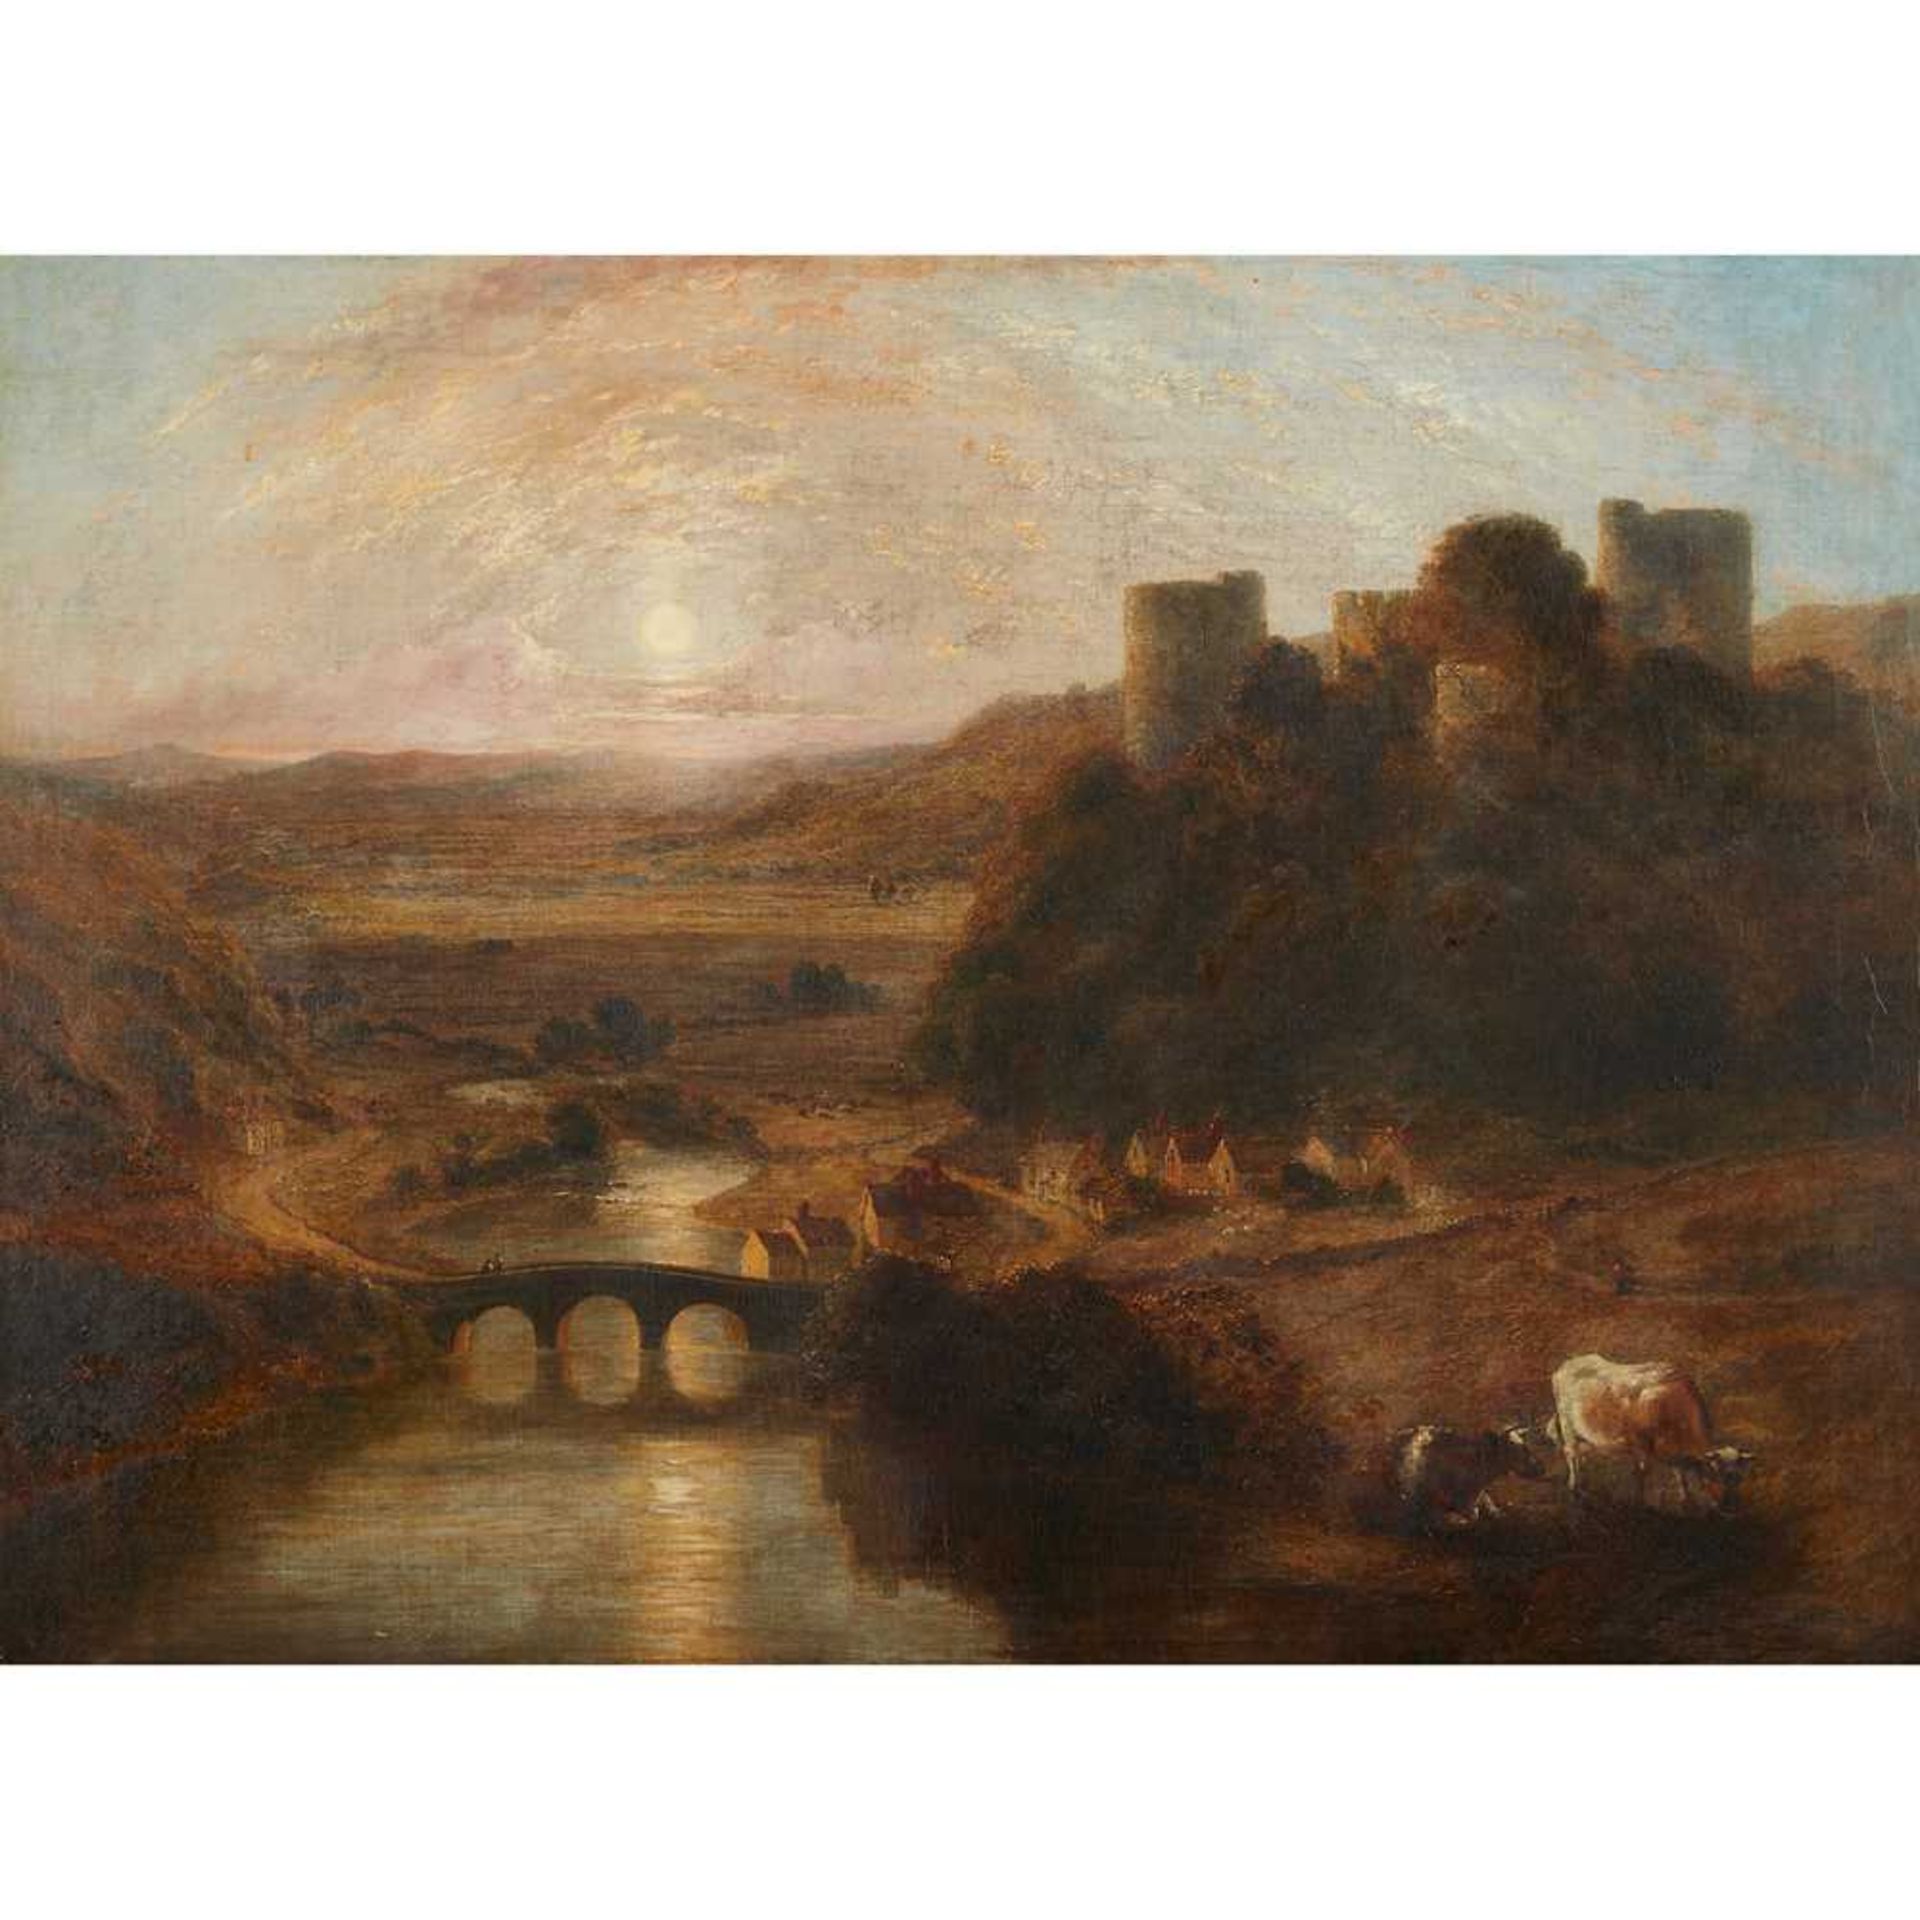 ENGLISH SCHOOL C.1830 A PANORAMIC RIVER LANDSCAPE WITH CASTLE RUINS ON A HILLSIDE